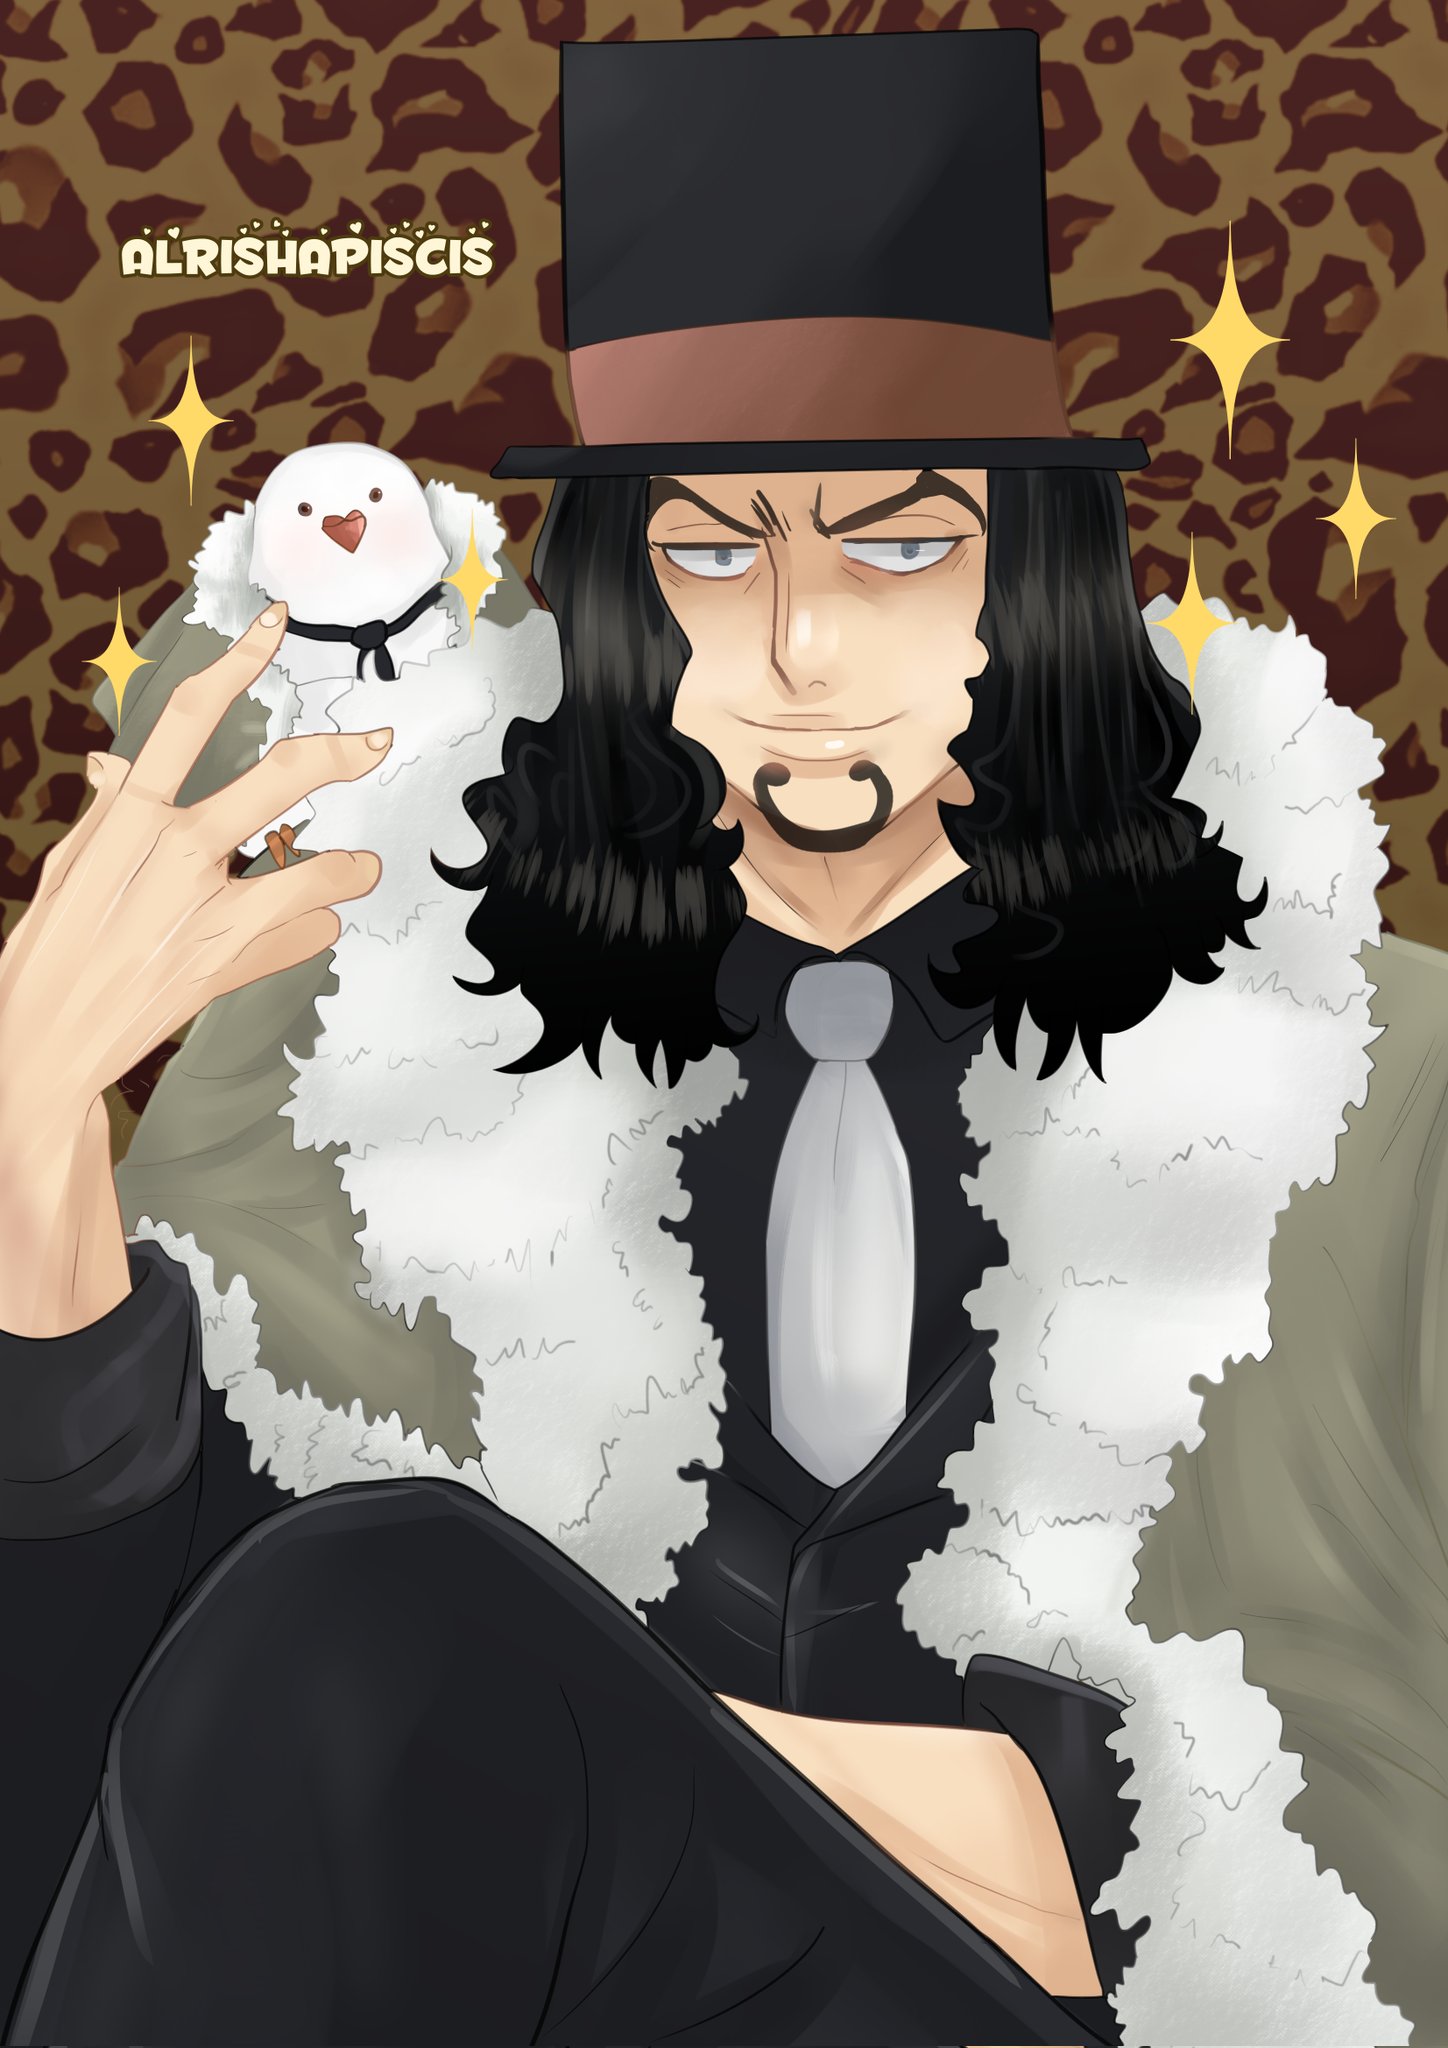 Alrisha Piscis Rob Lucci Redraw From An Official Art That I Found Onepiece Onepiecefanart Roblucci Lucci ロブ ルッチ Anime Animefanart Onepiecelucci Fanart Animefanart T Co Hssjlebre1 Twitter